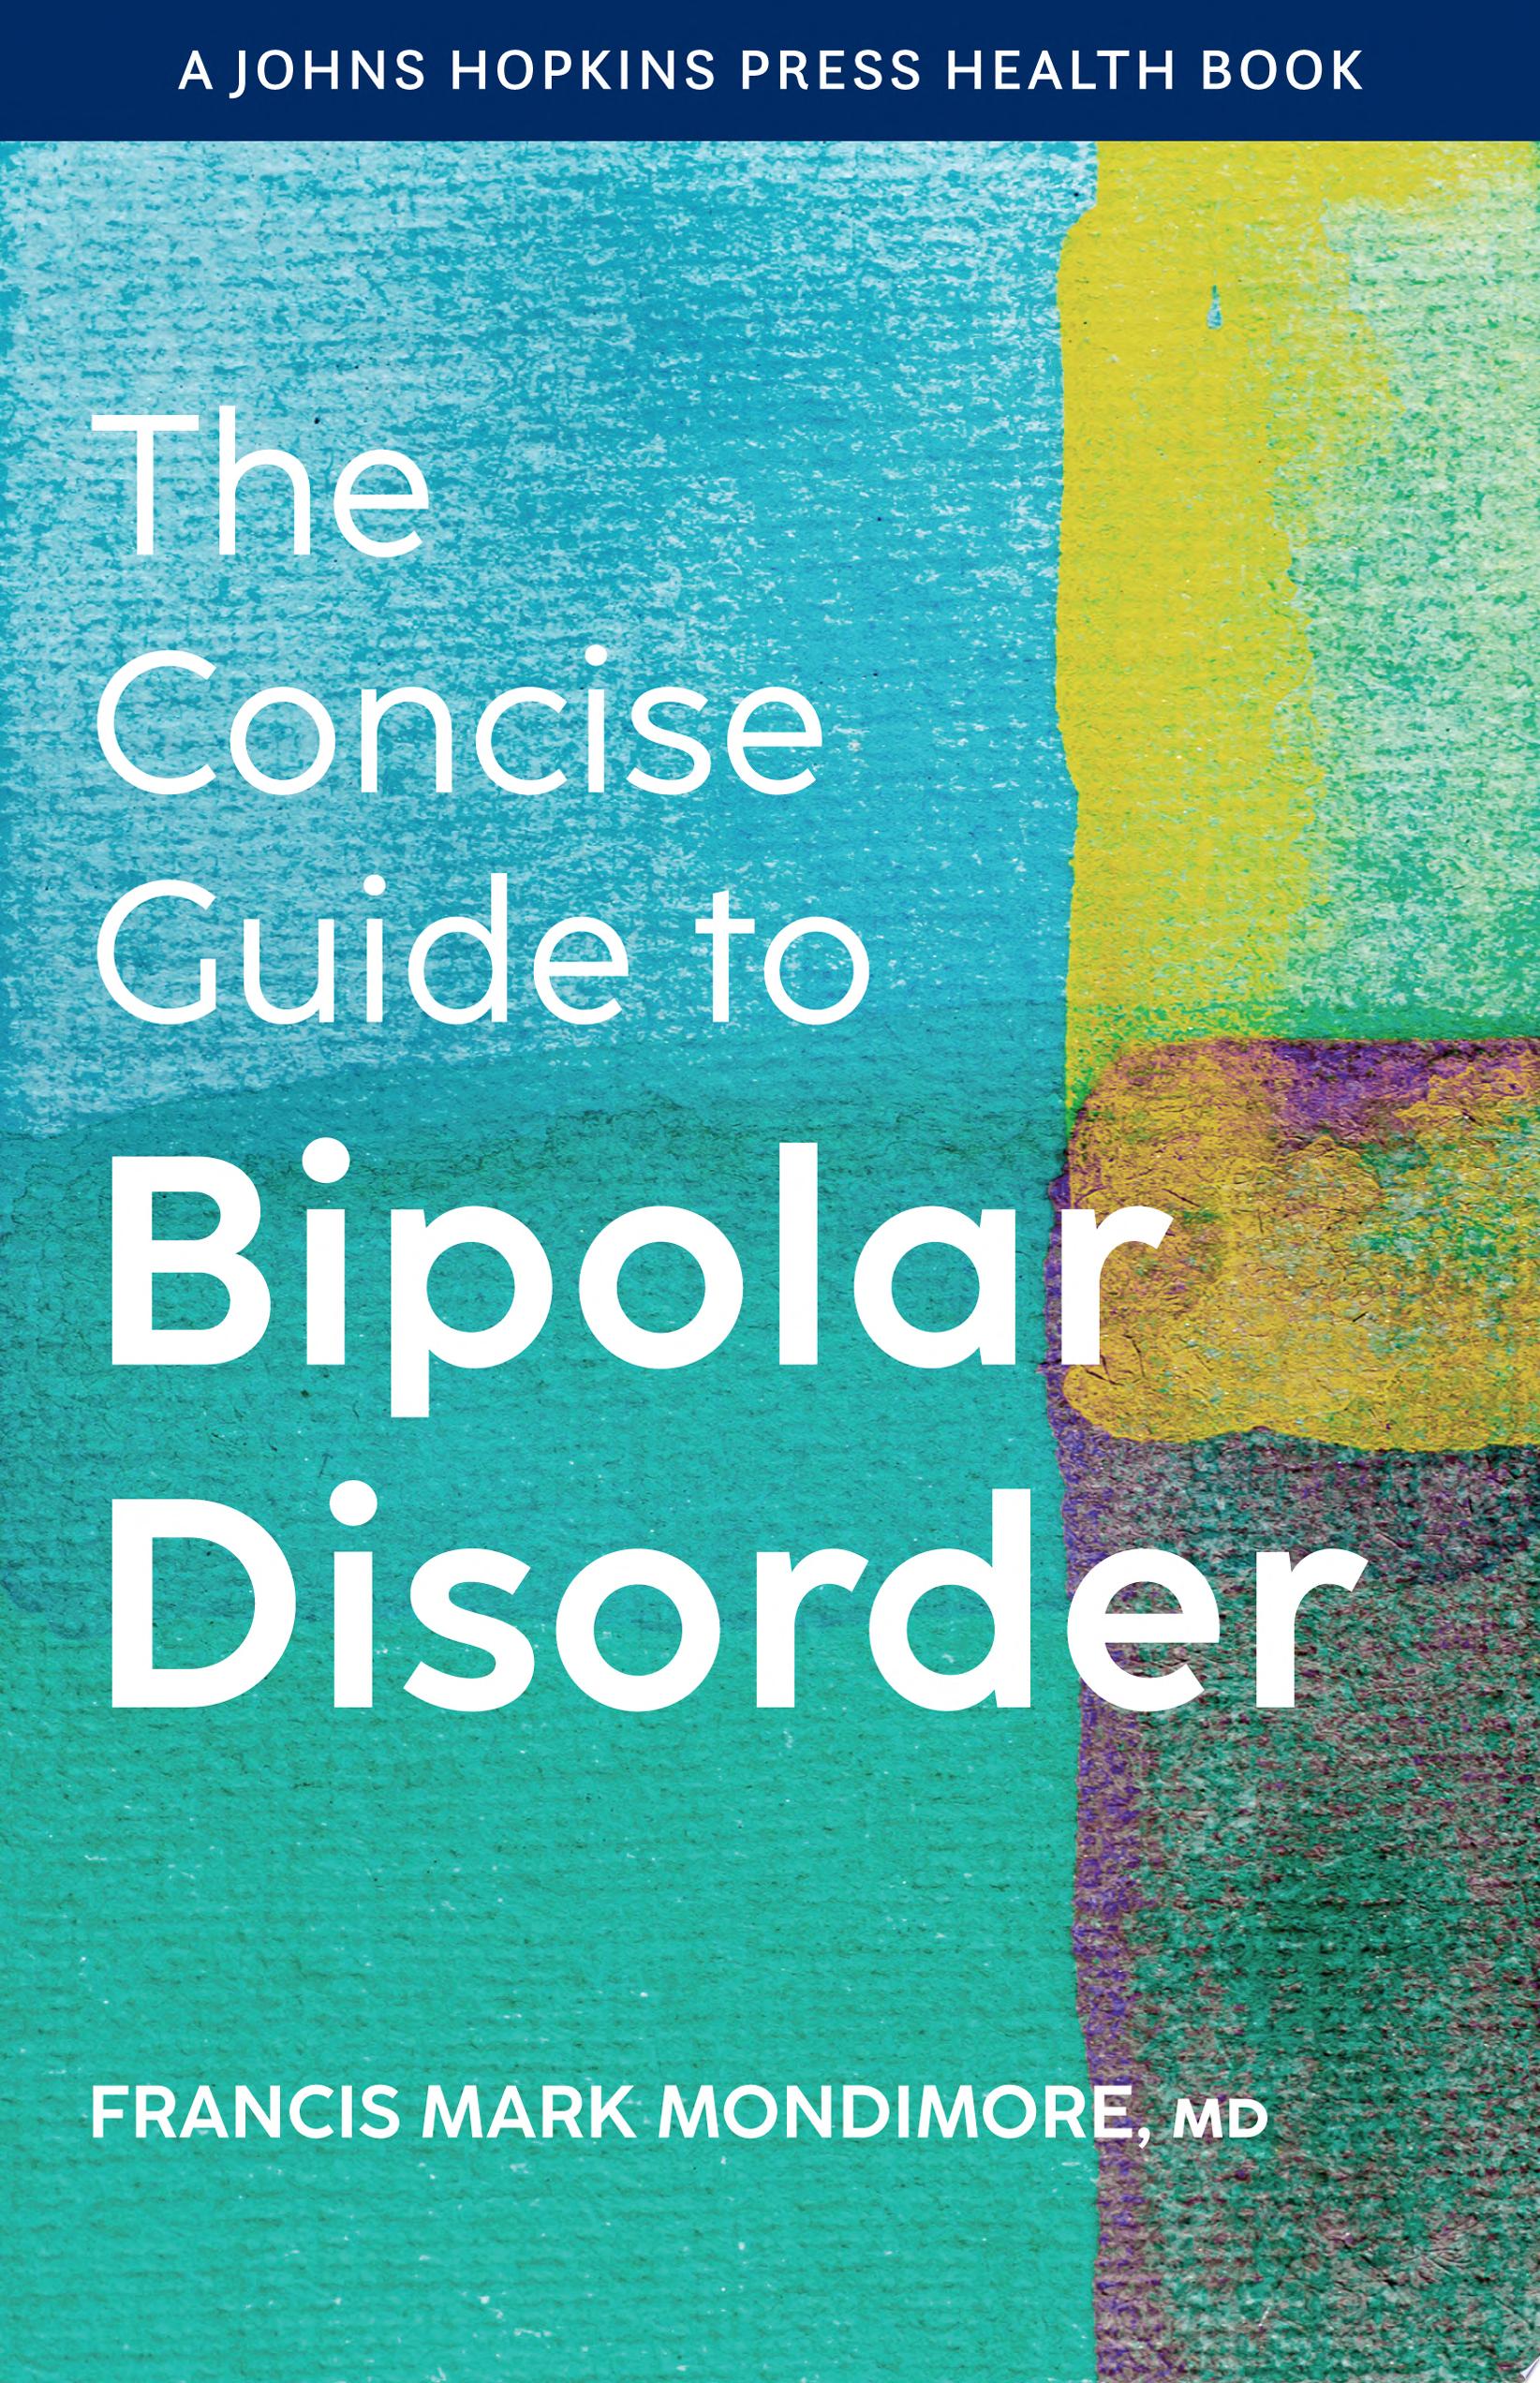 Image for "The Concise Guide to Bipolar Disorder"